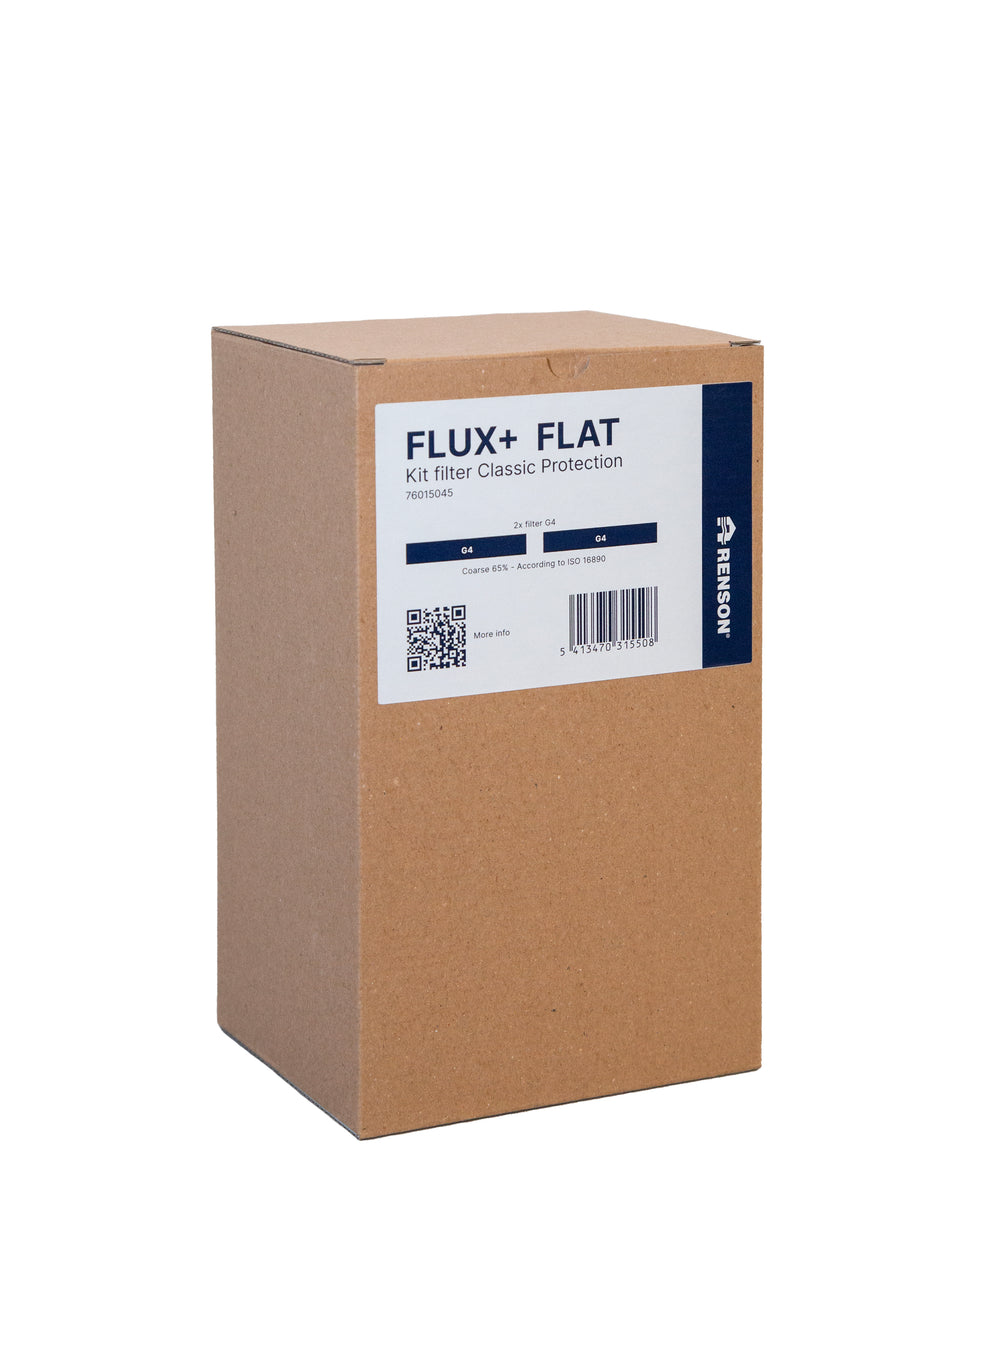 KIT FLUX+ FLAT : classic protection filter 